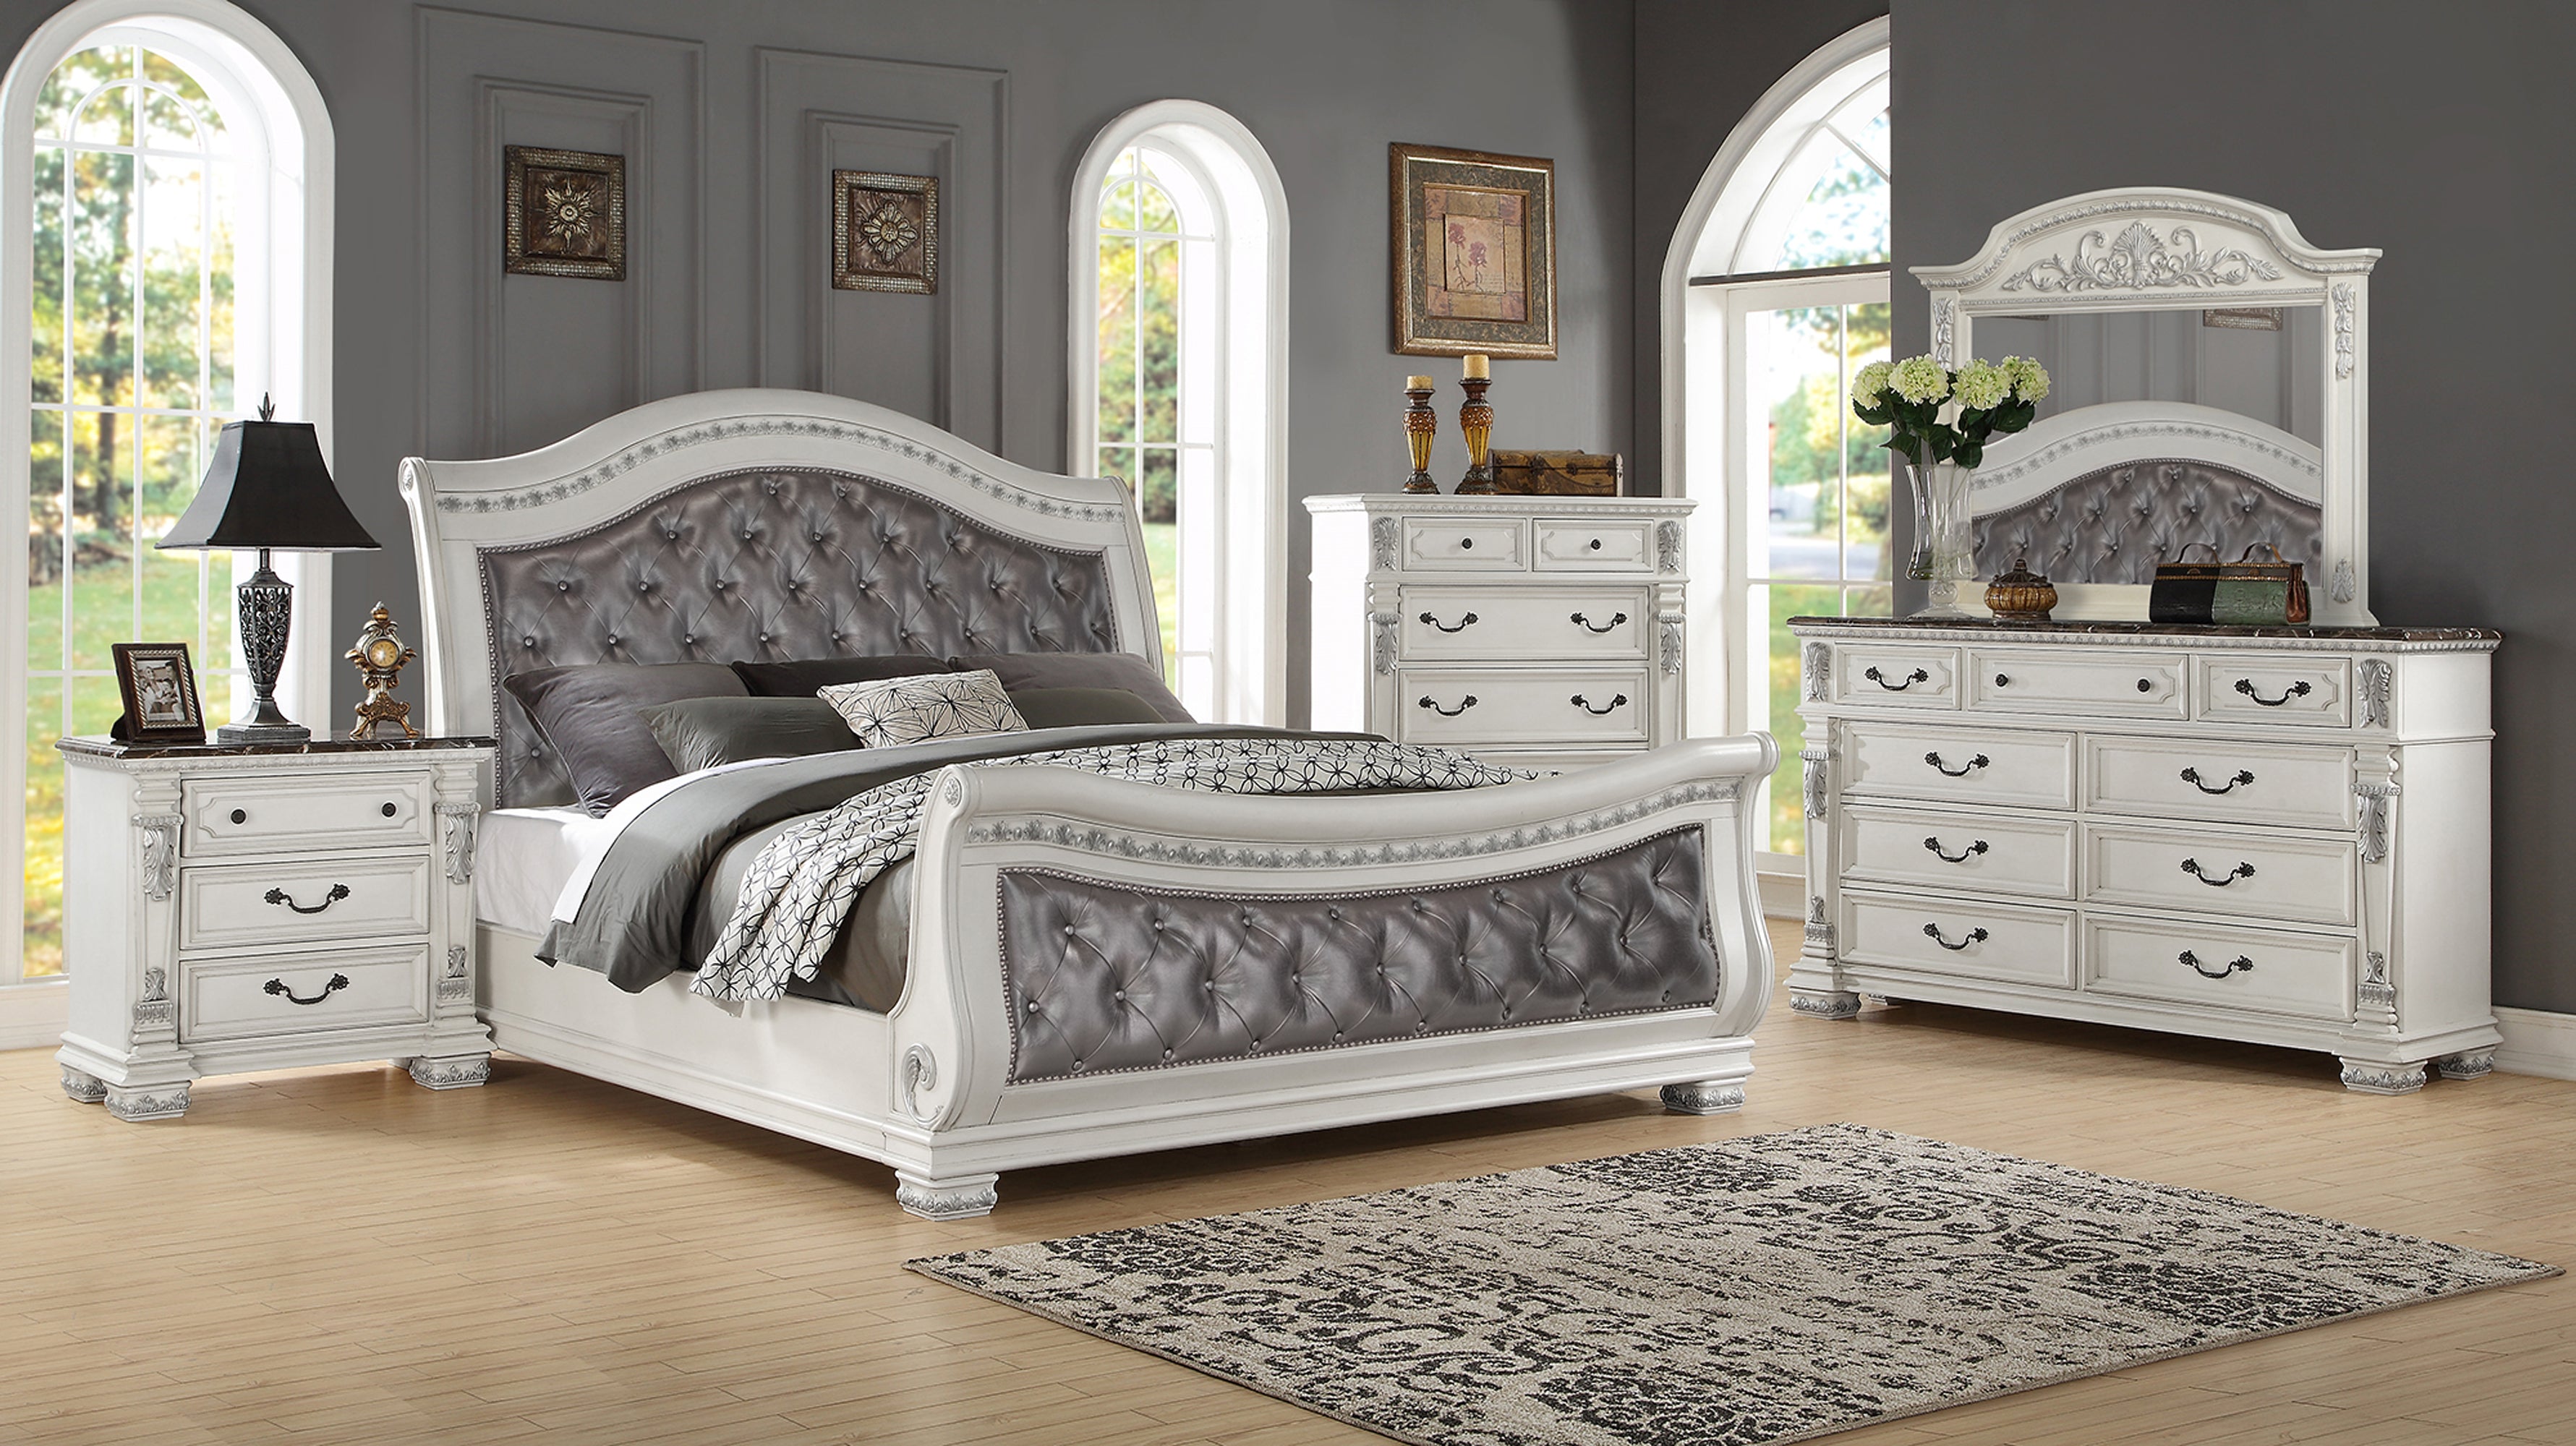 Oasis Home Bianca King SIze Bed